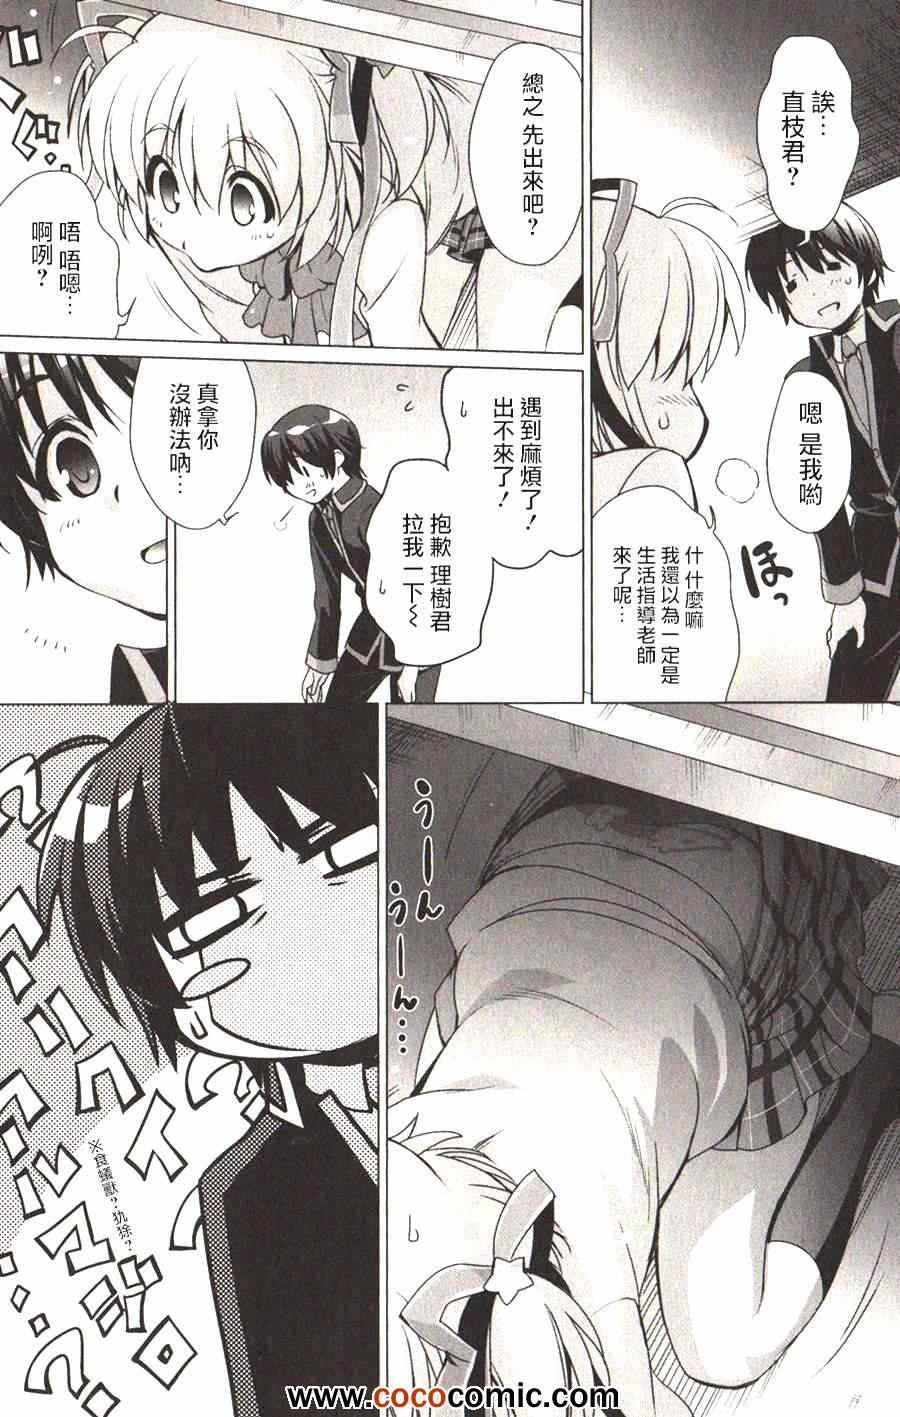 《Little Busters! End of Refrain》漫画 End of Refrain 002集